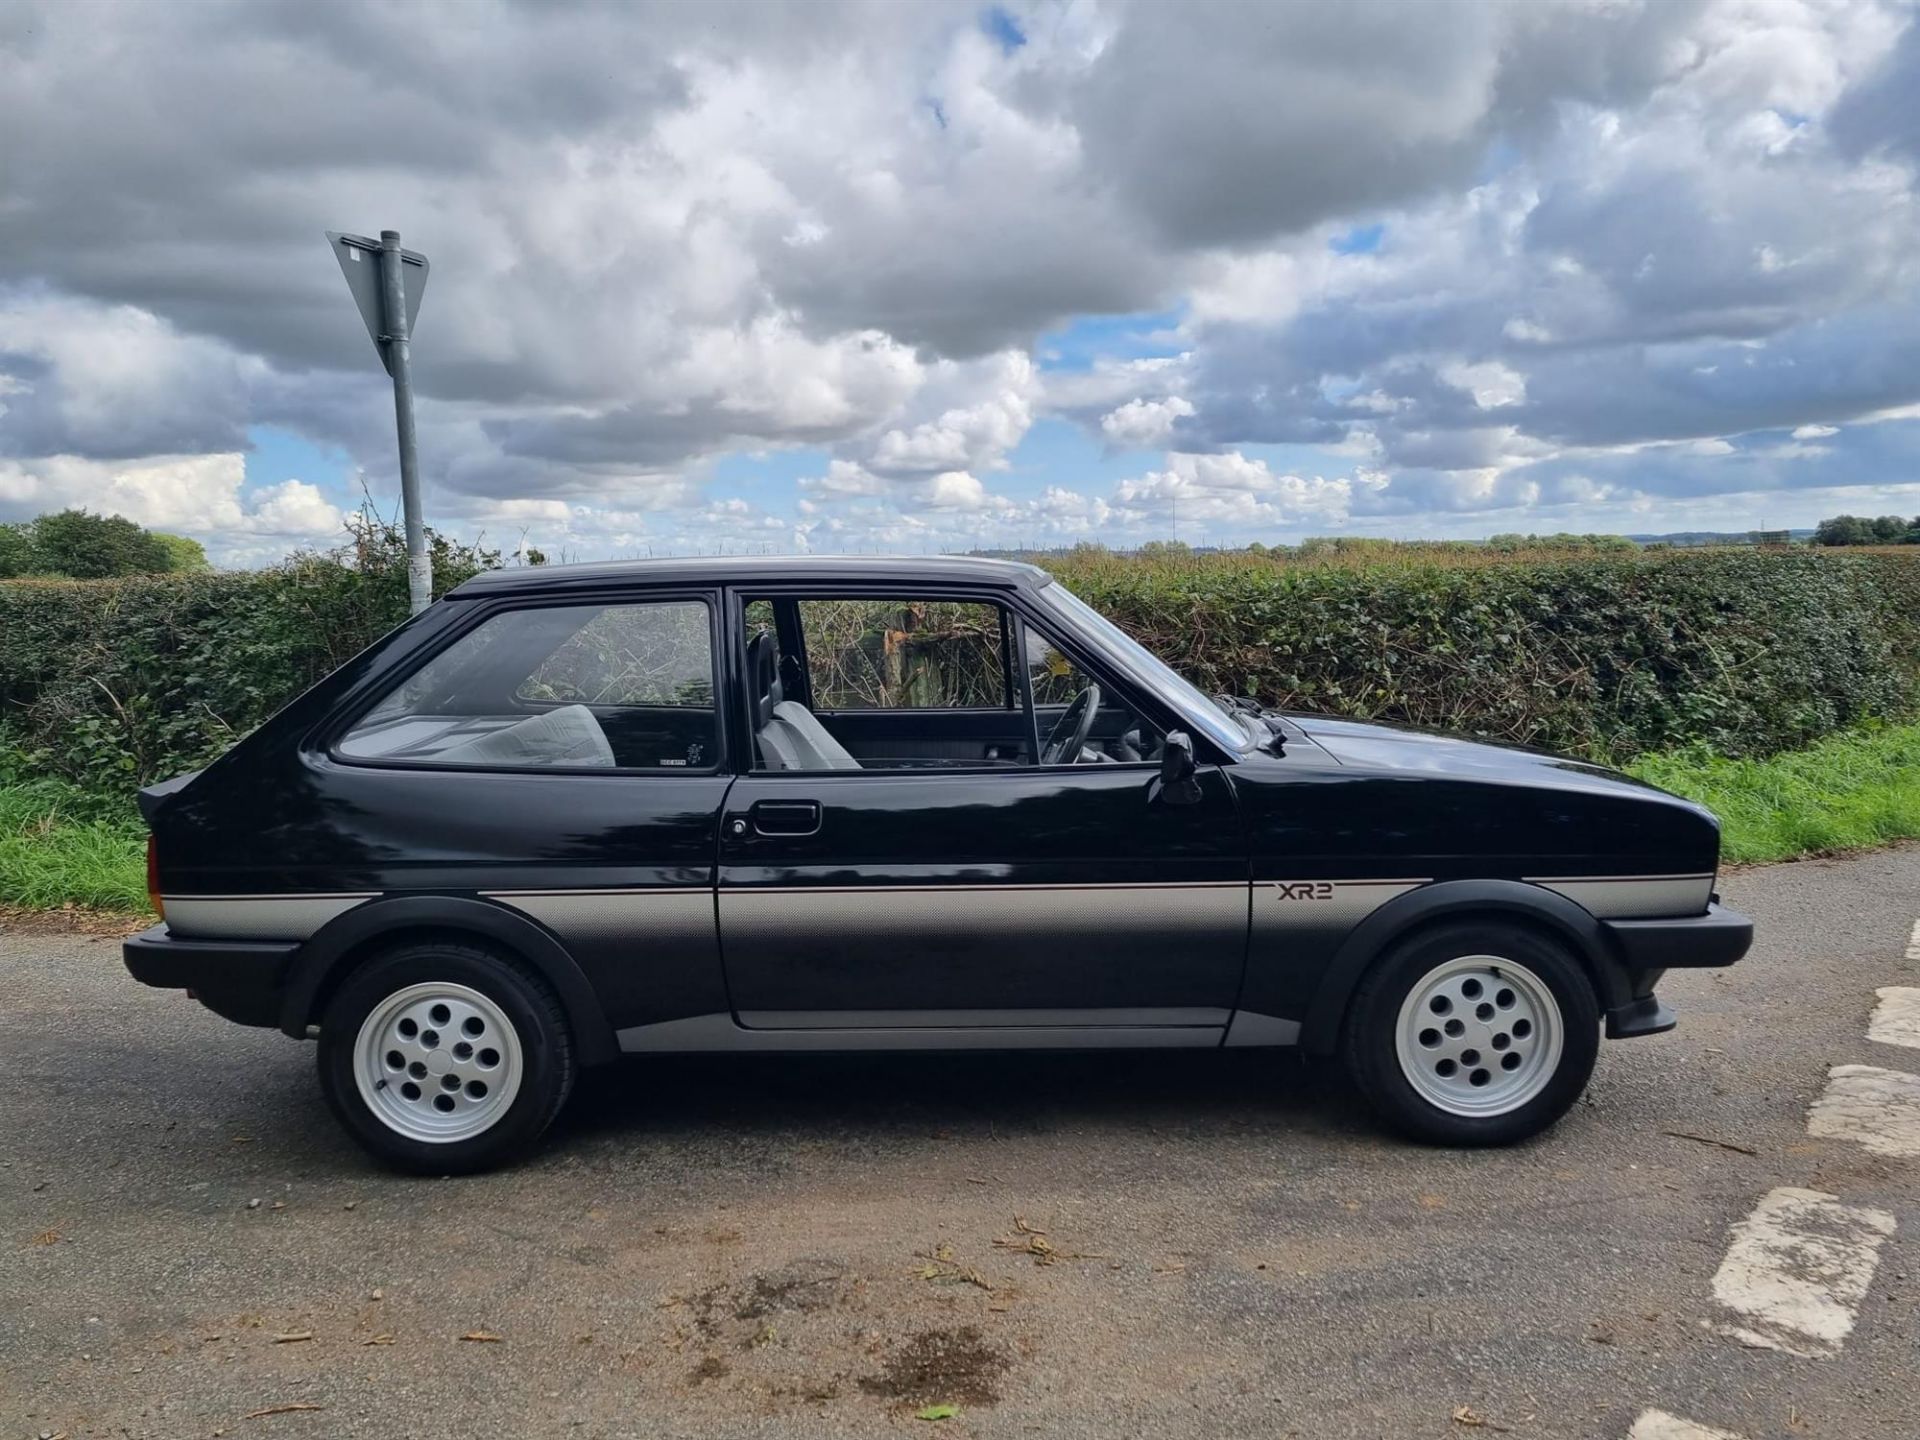 1982 Ford XR2 Mk1 - Image 5 of 10